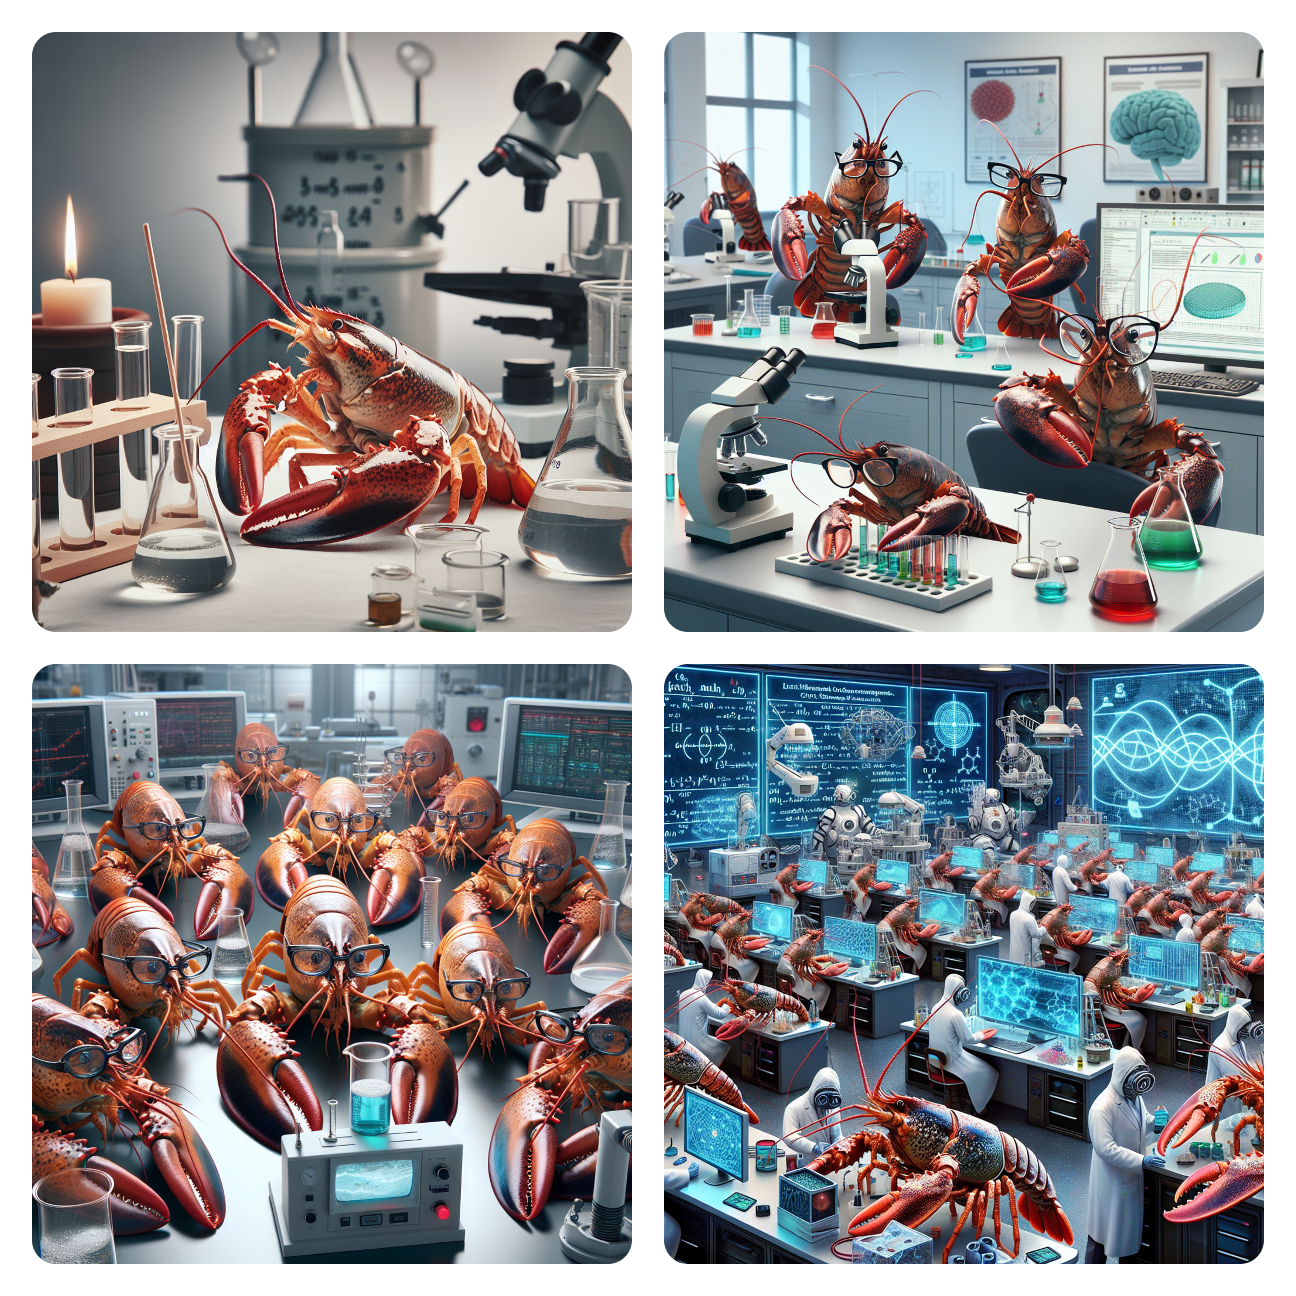 Image: Lobsters Cooking Up a Genius